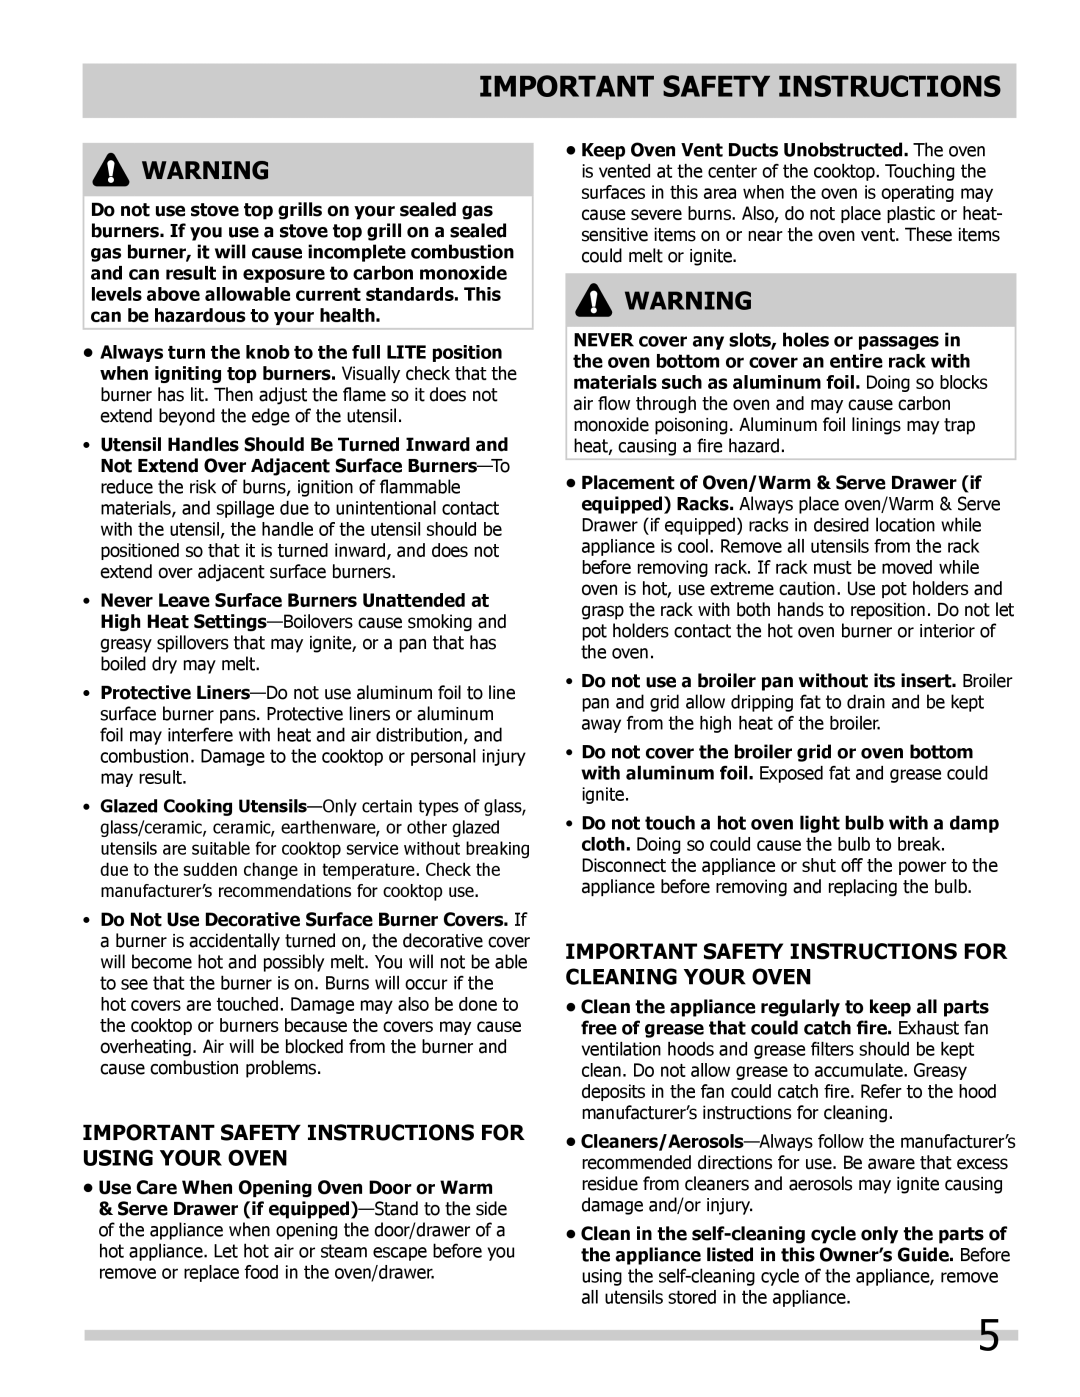 Frigidaire FGGS3045KF Important Safety Instructions For Using Your Oven, Never Leave Surface Burners Unattended at 